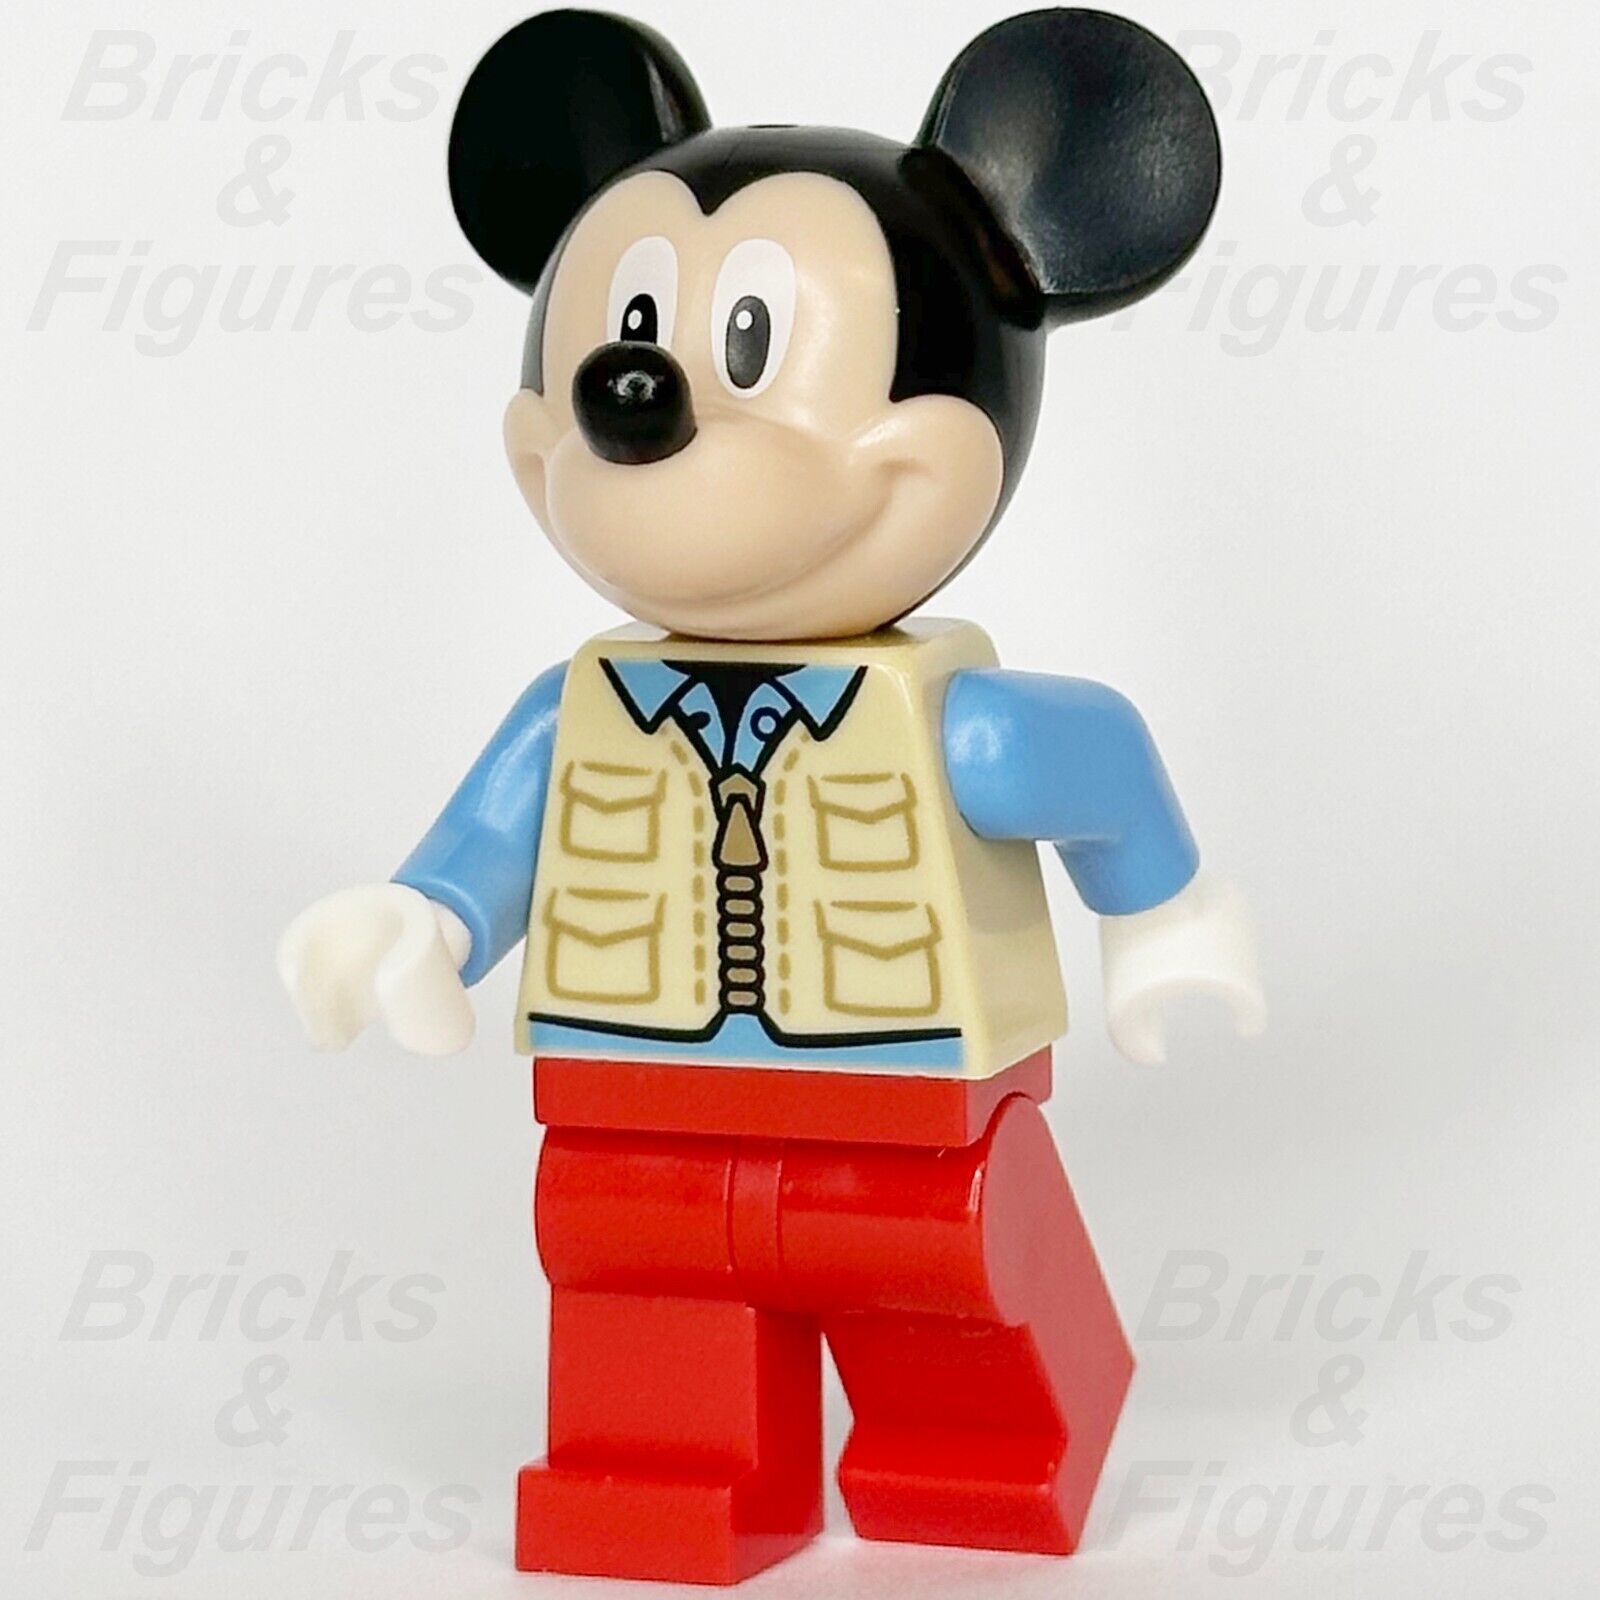 LEGO Disney Mickey Mouse Minifigure Mickey and Friends Tan Vest 10777 dis072